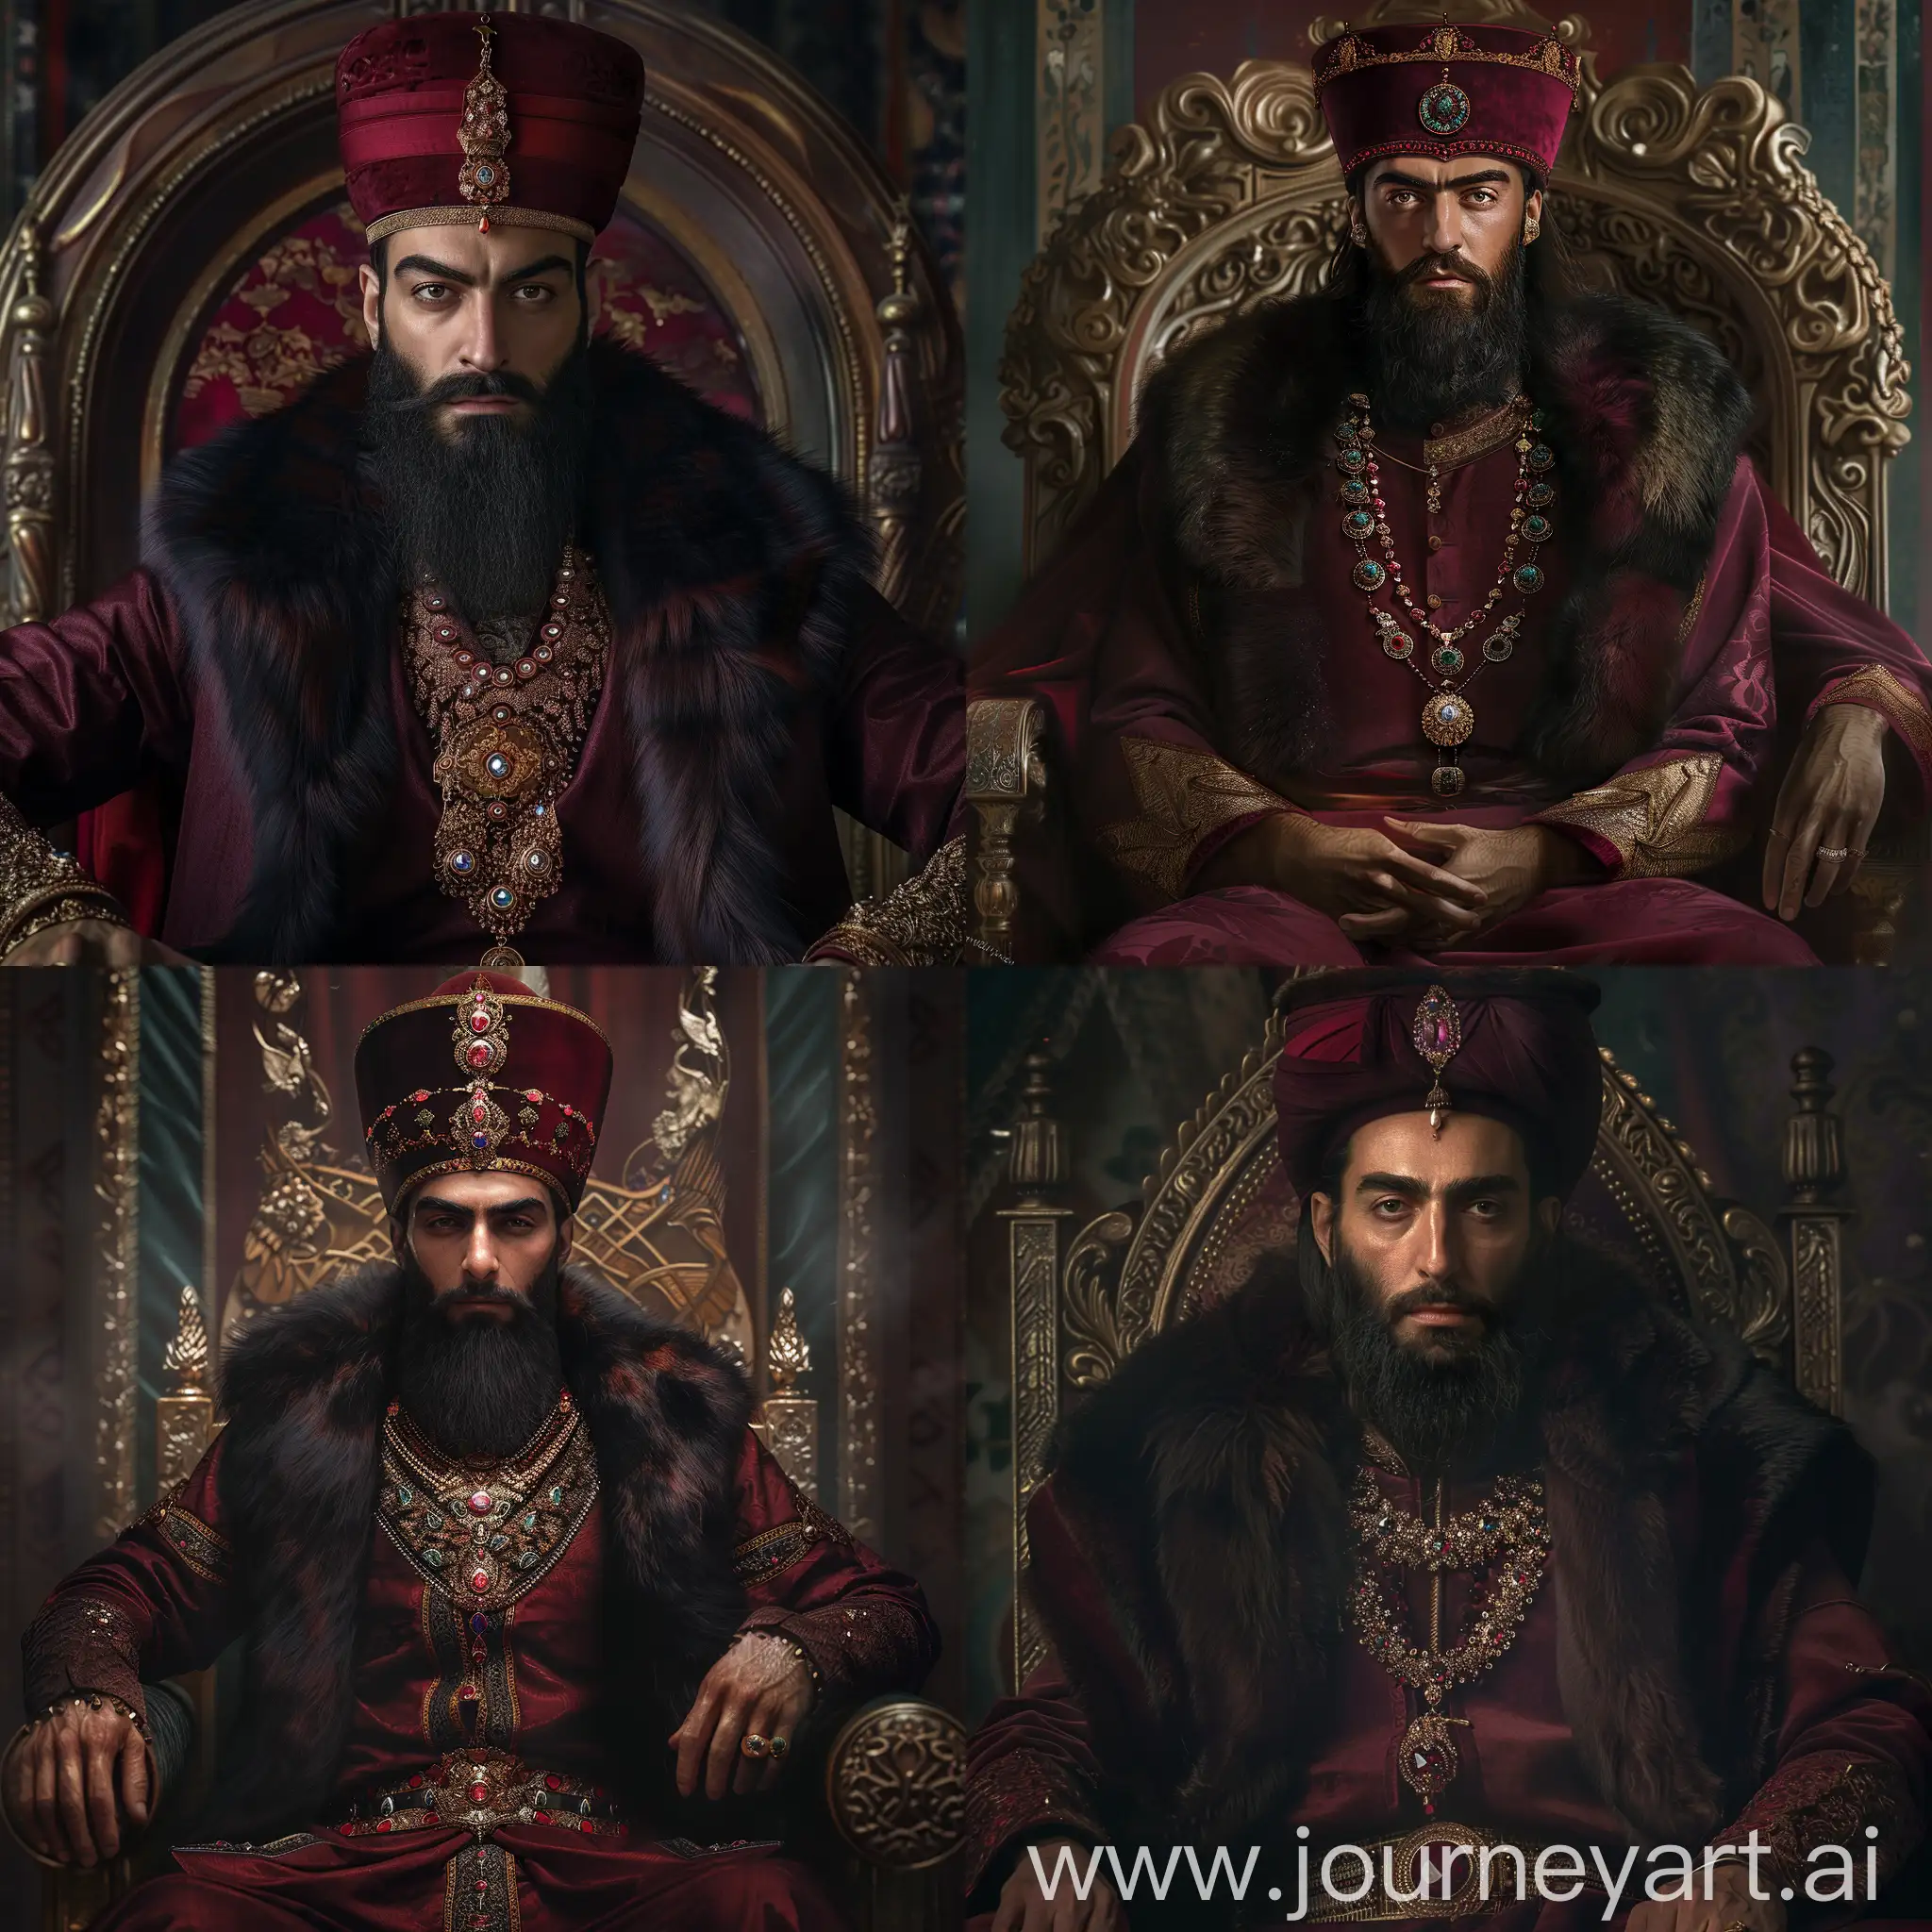 Nader-Shah-Afsharid-Ruler-Sitting-Boldly-on-a-Luxurious-Throne